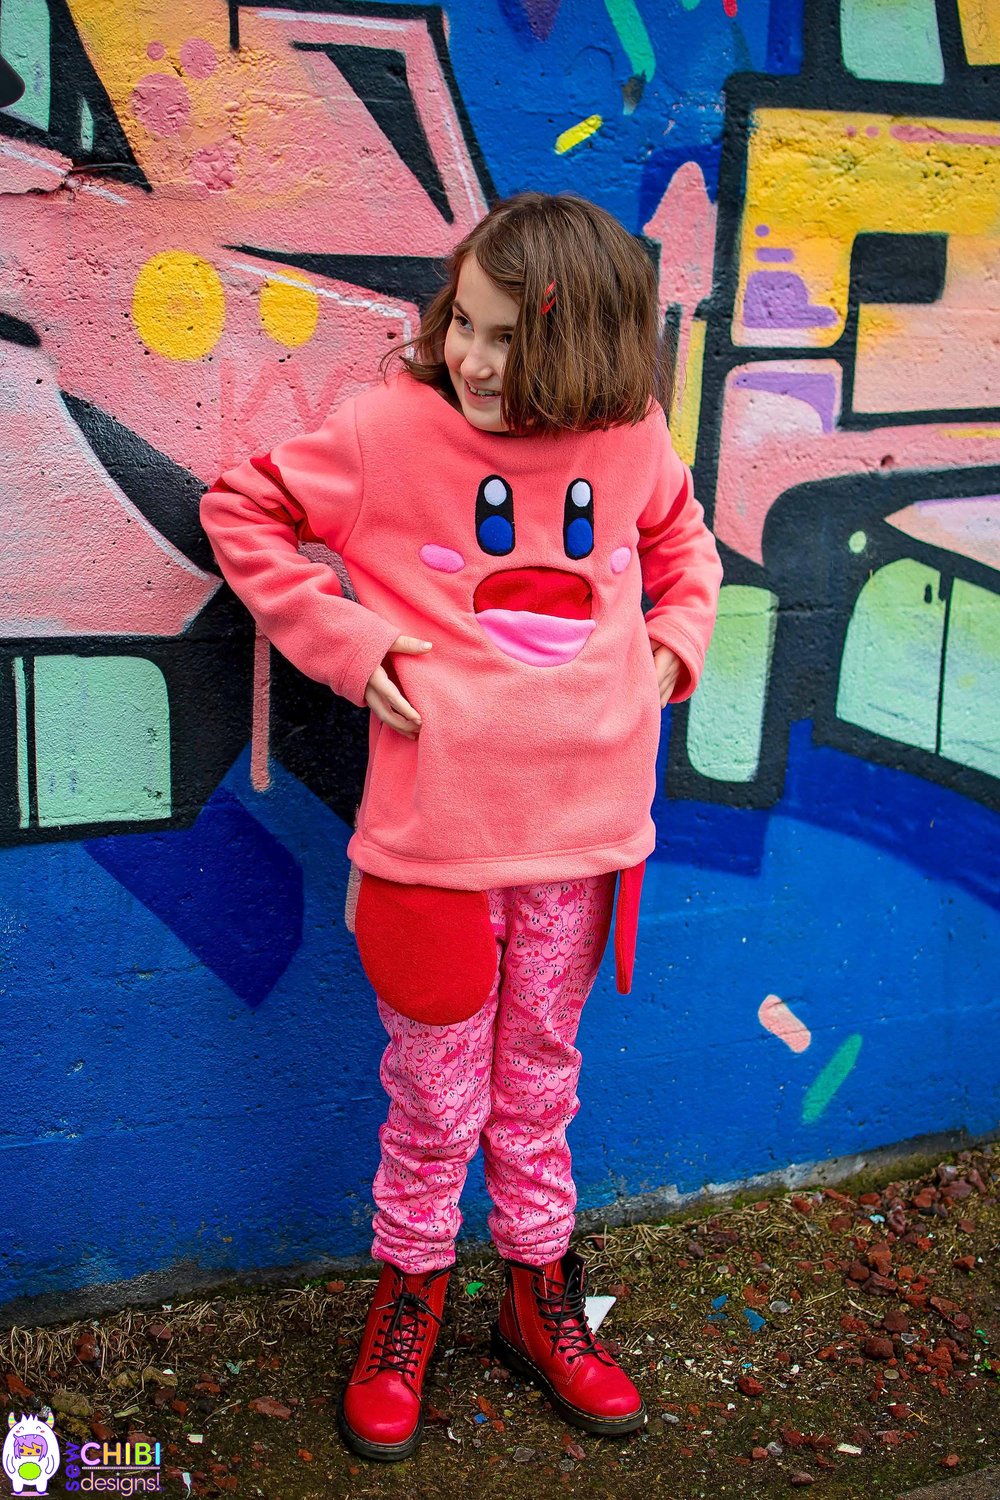 Sew Chibi Designs Kirby inspired birthday outfit #cosplay for kids!